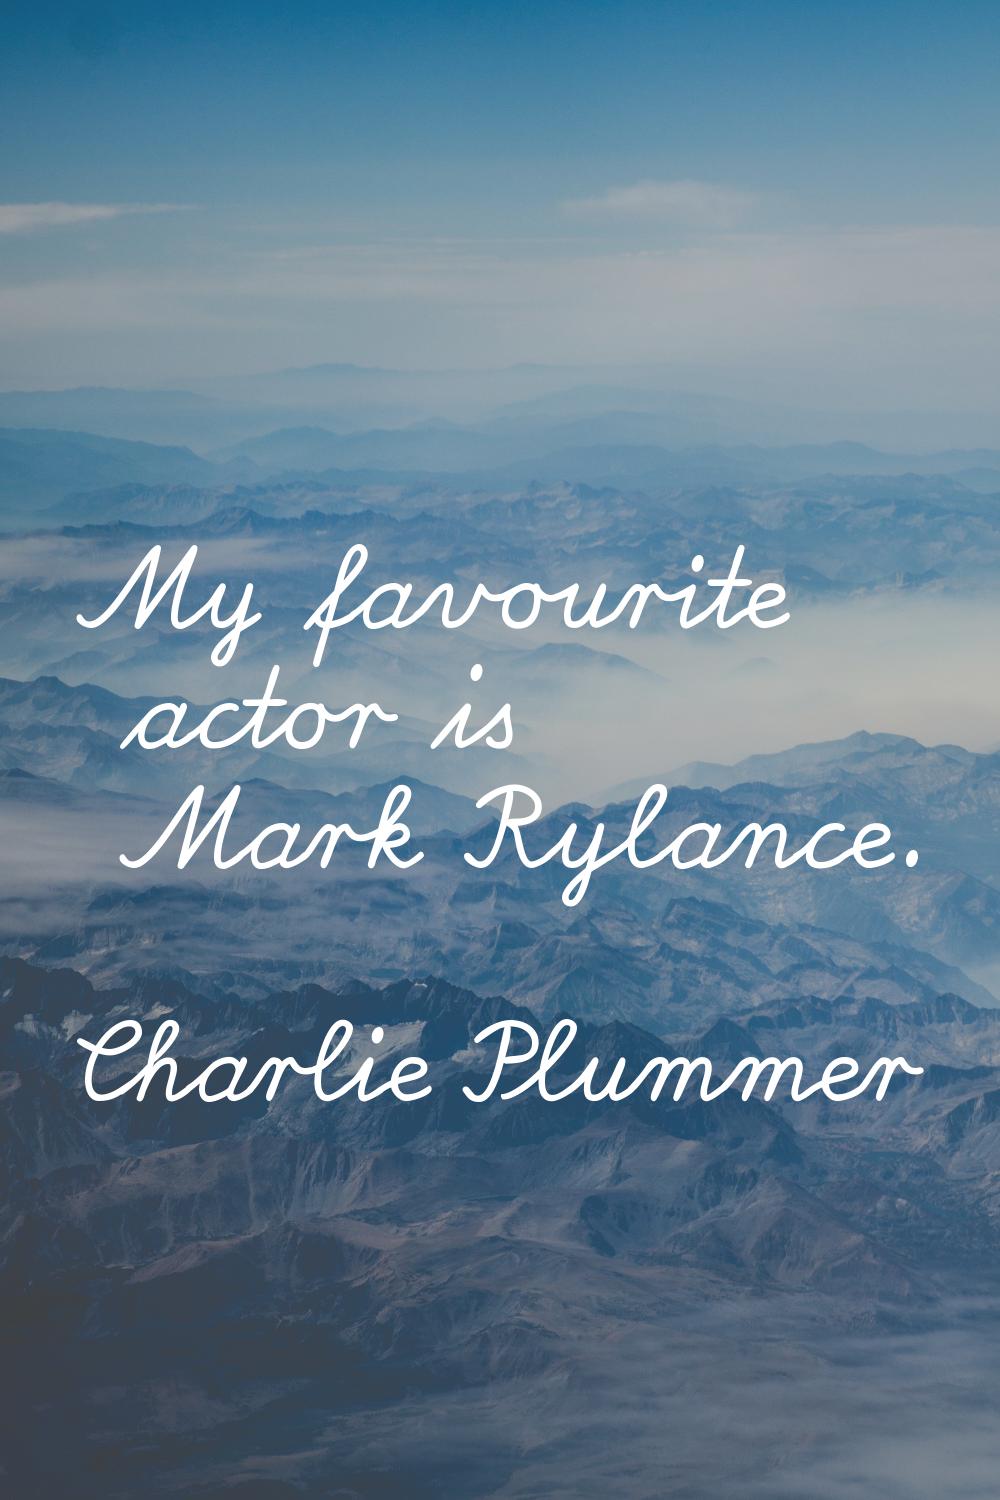 My favourite actor is Mark Rylance.